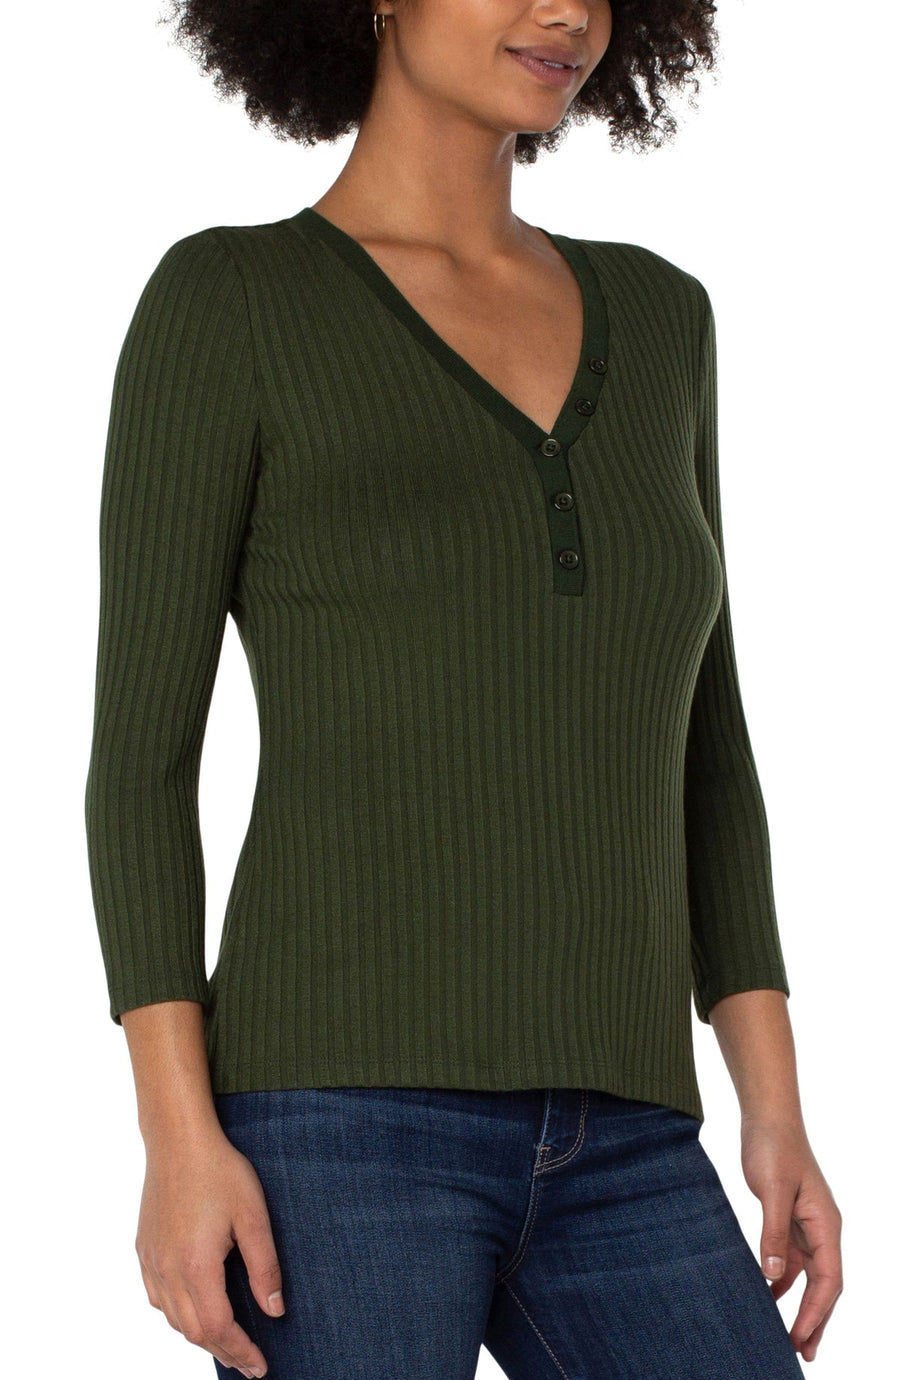 3/4 Sleeve Button Front Rib Knit Henley Top - Forest Green